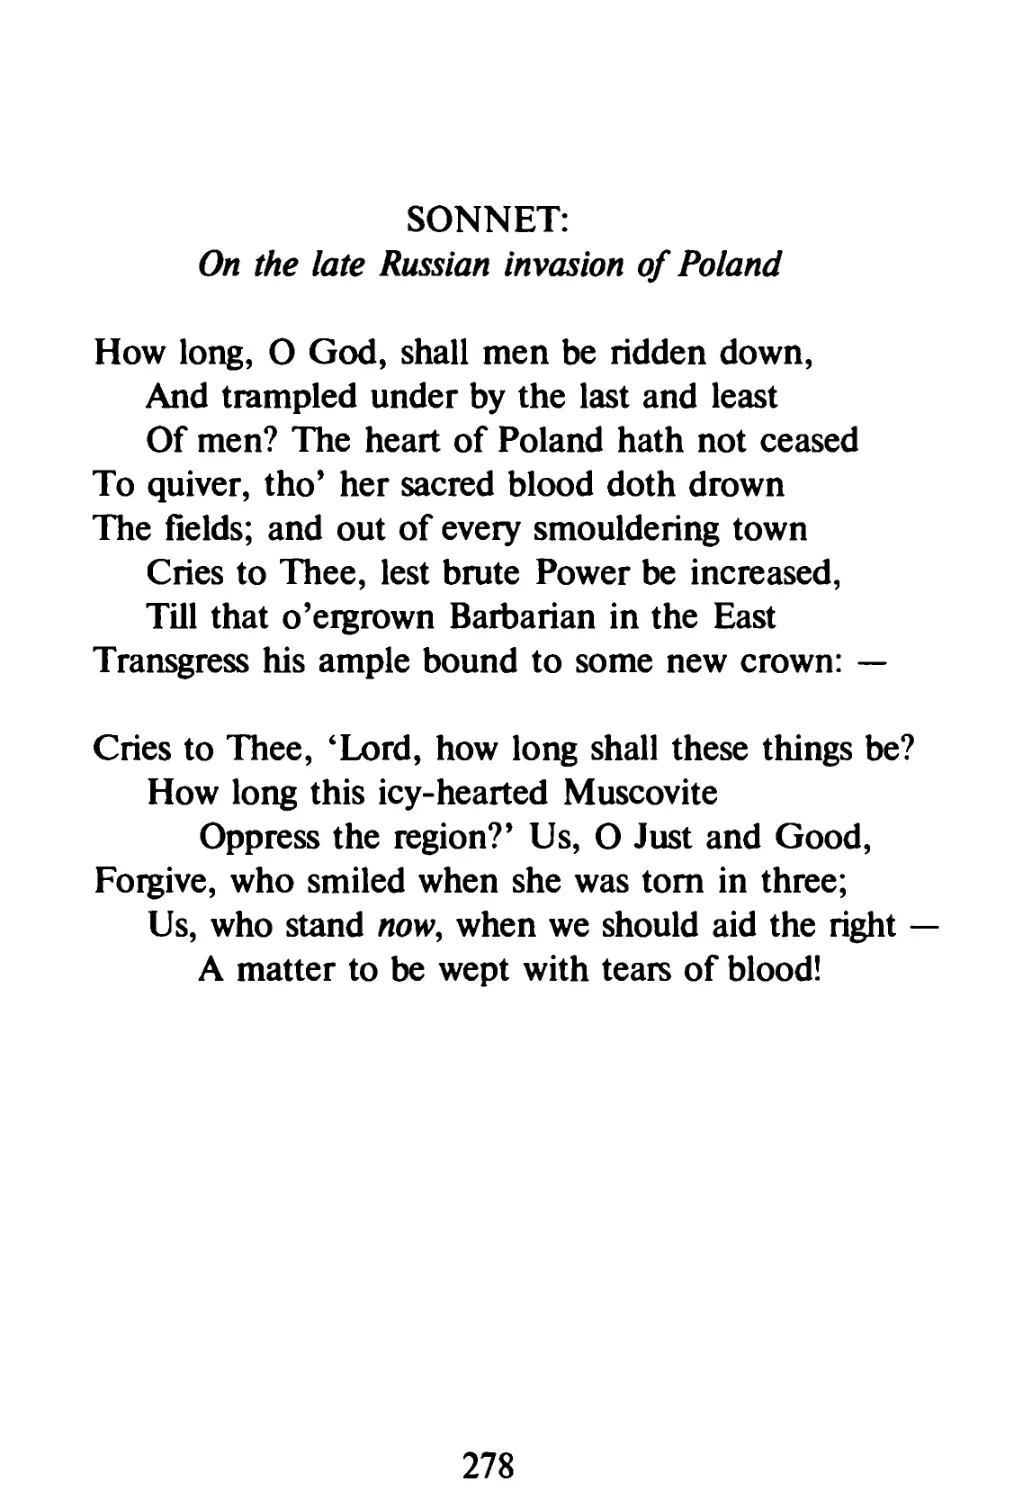 Sonnet: On the Late Russian Invasion of Poland